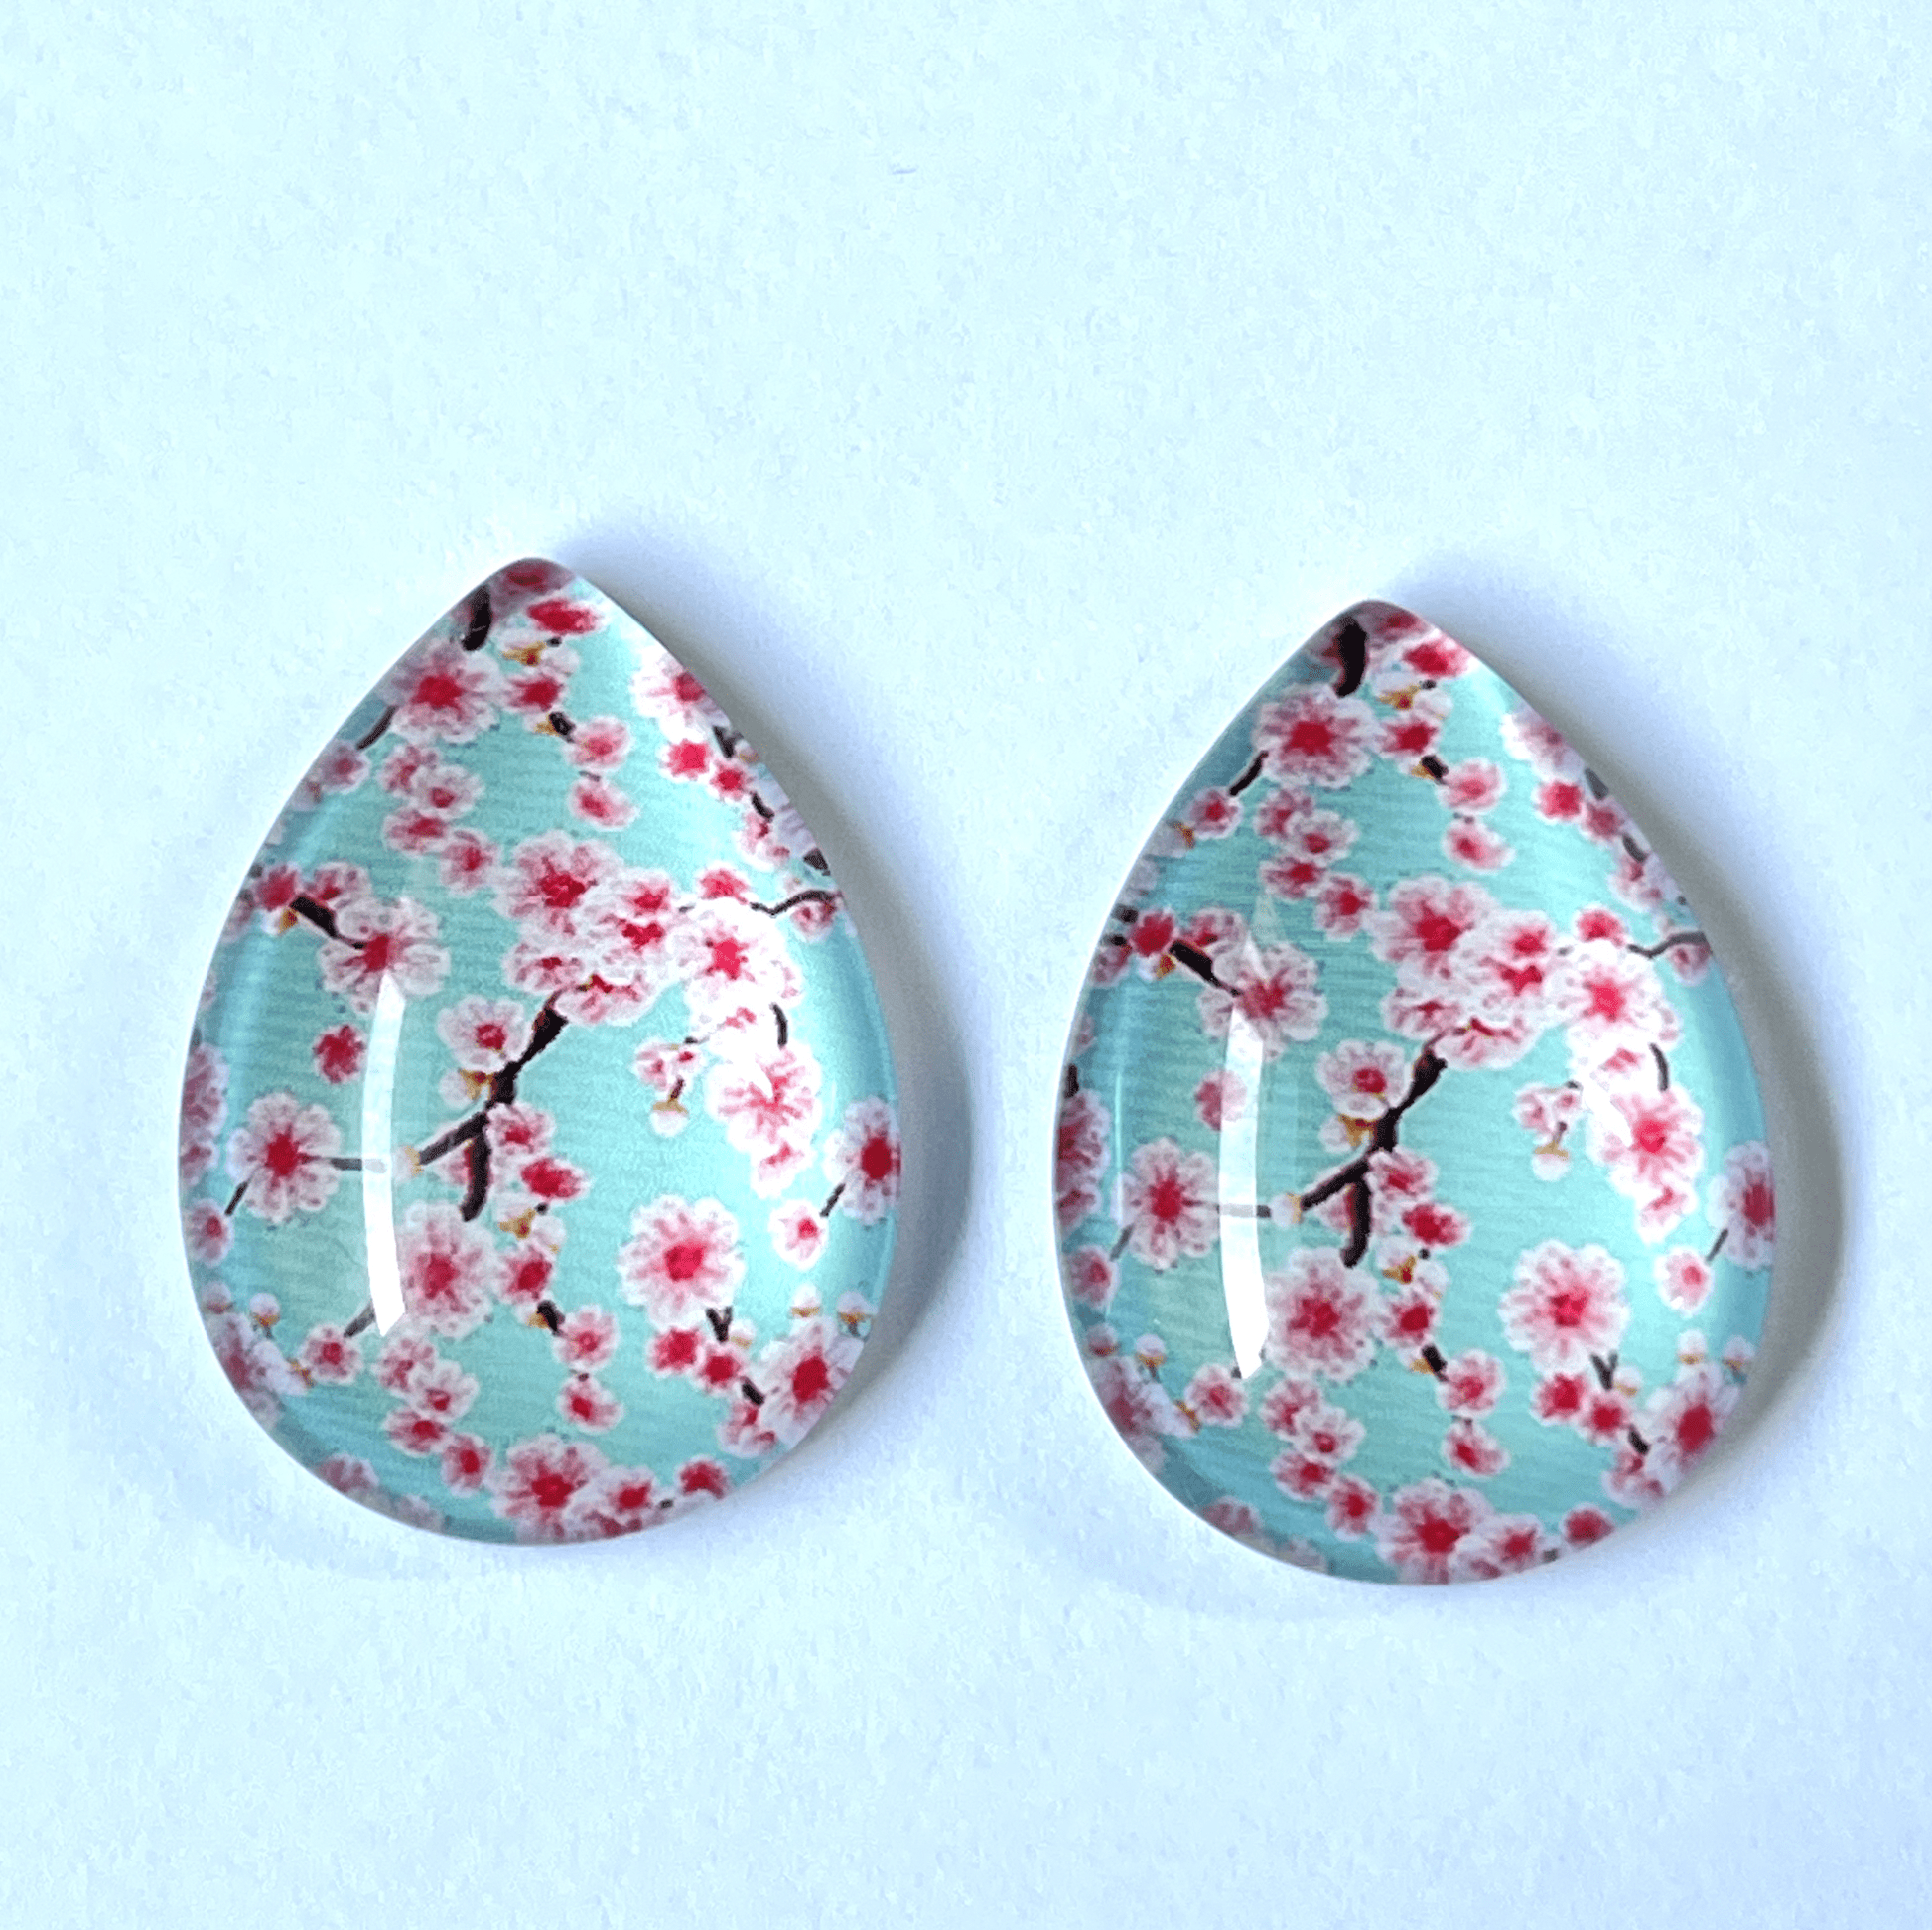 Sundaylace Creations & Bling Resin Gems Light Blue Sky with Cherry Blossom Teardrops 18*25mm Floral Various Teardrops, Acrylic Printed Resin Gems